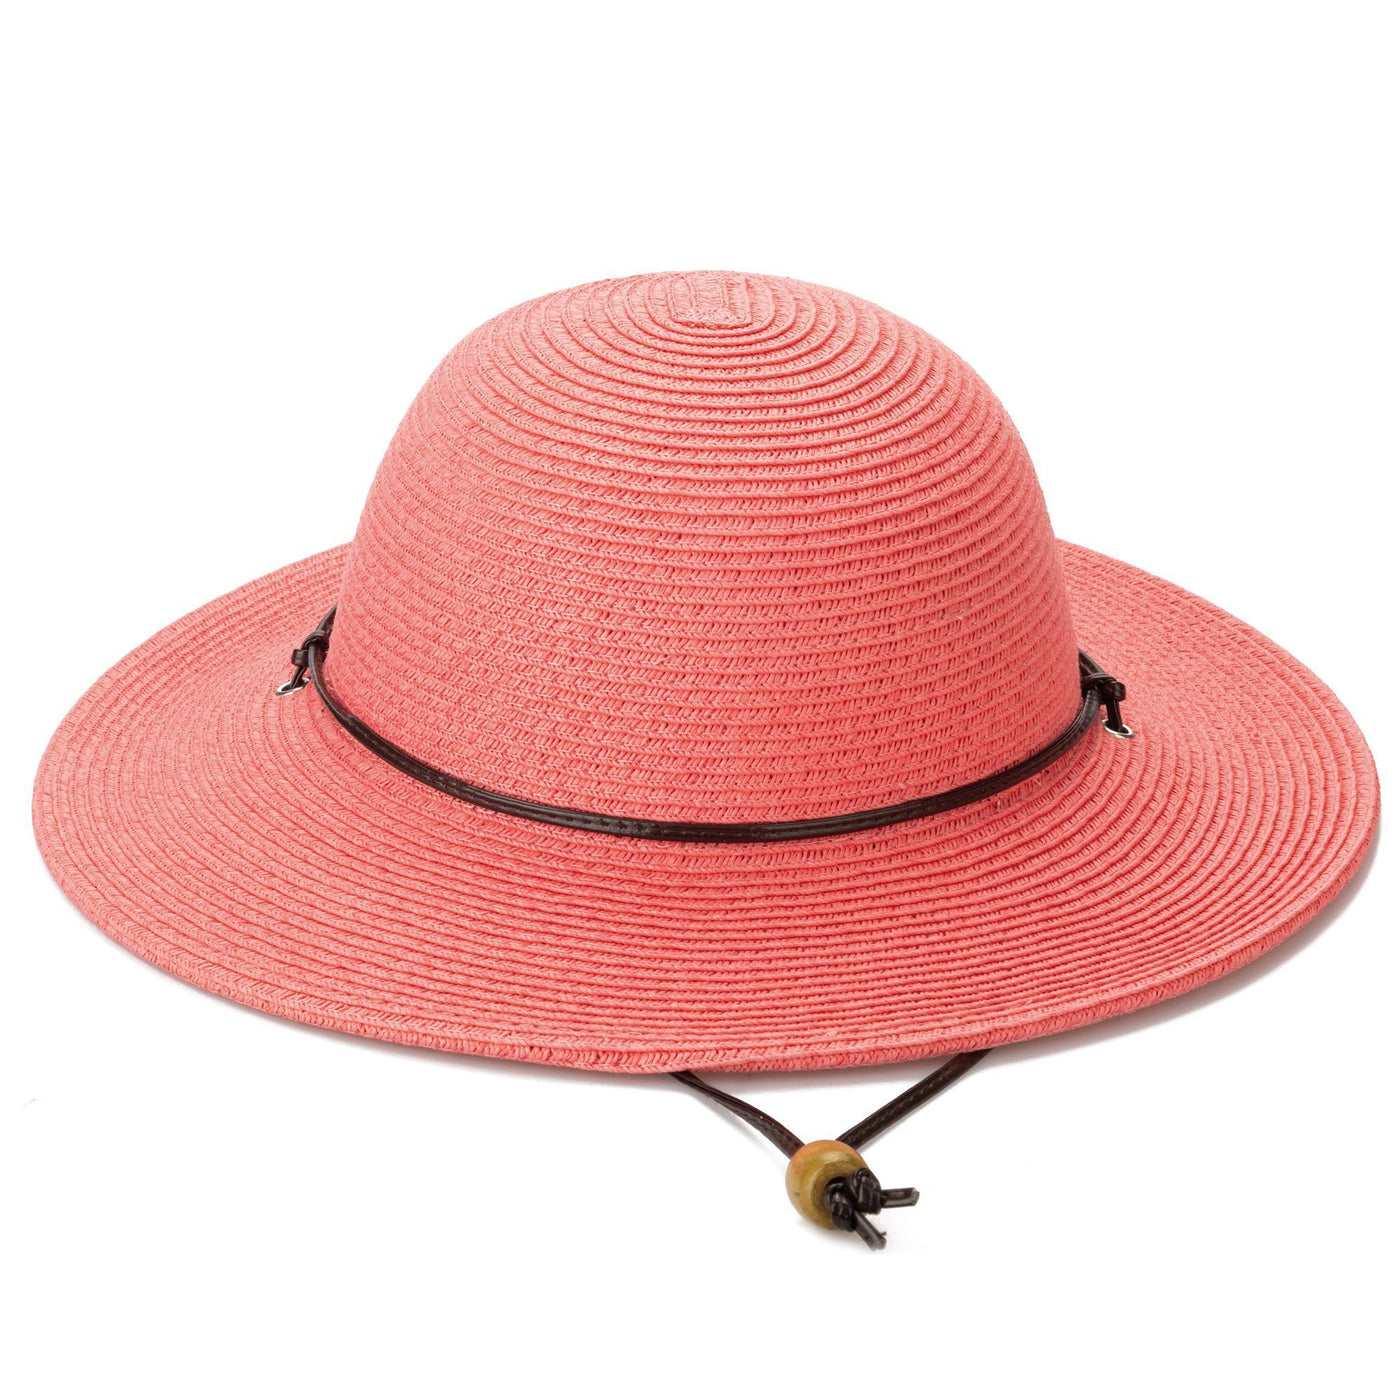 SUN BRIM - Hang Ten Kids Solid Sun Brim With Embroidered Patch And Chin Cord